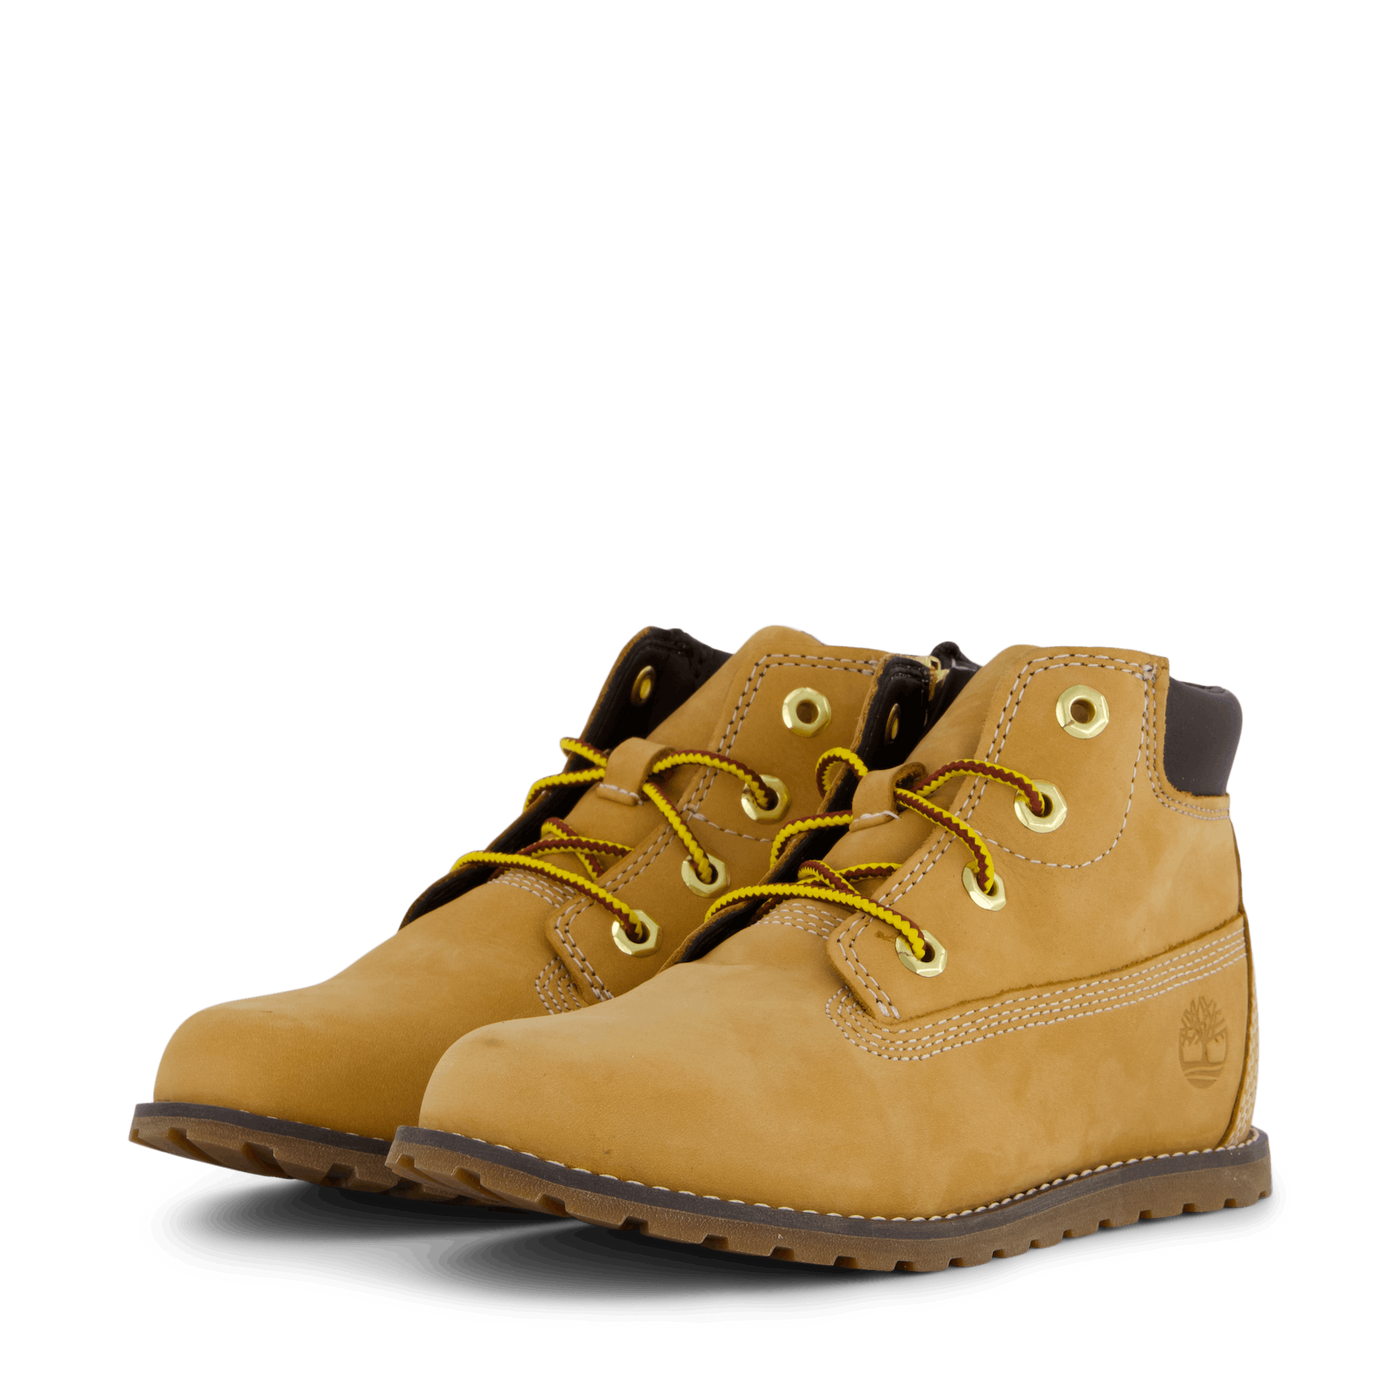 Pokey Pine 6In Boot with Wheat